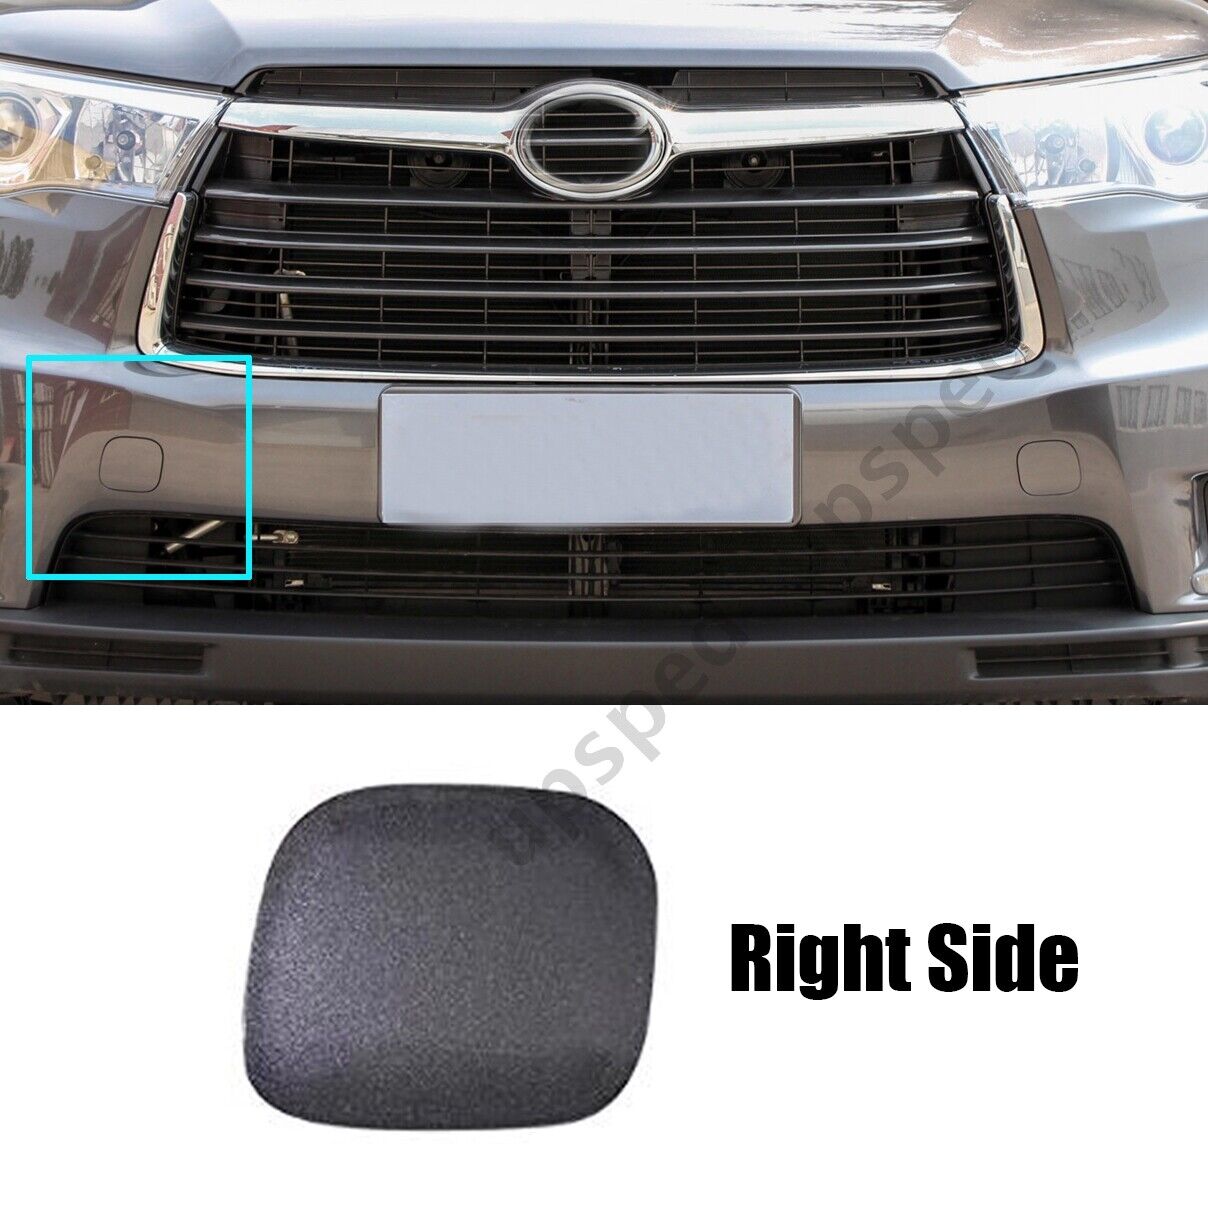 Front Bumper Tow Hook Cover Cap For Toyota Highlander 2014-2016 52128-0E110 New